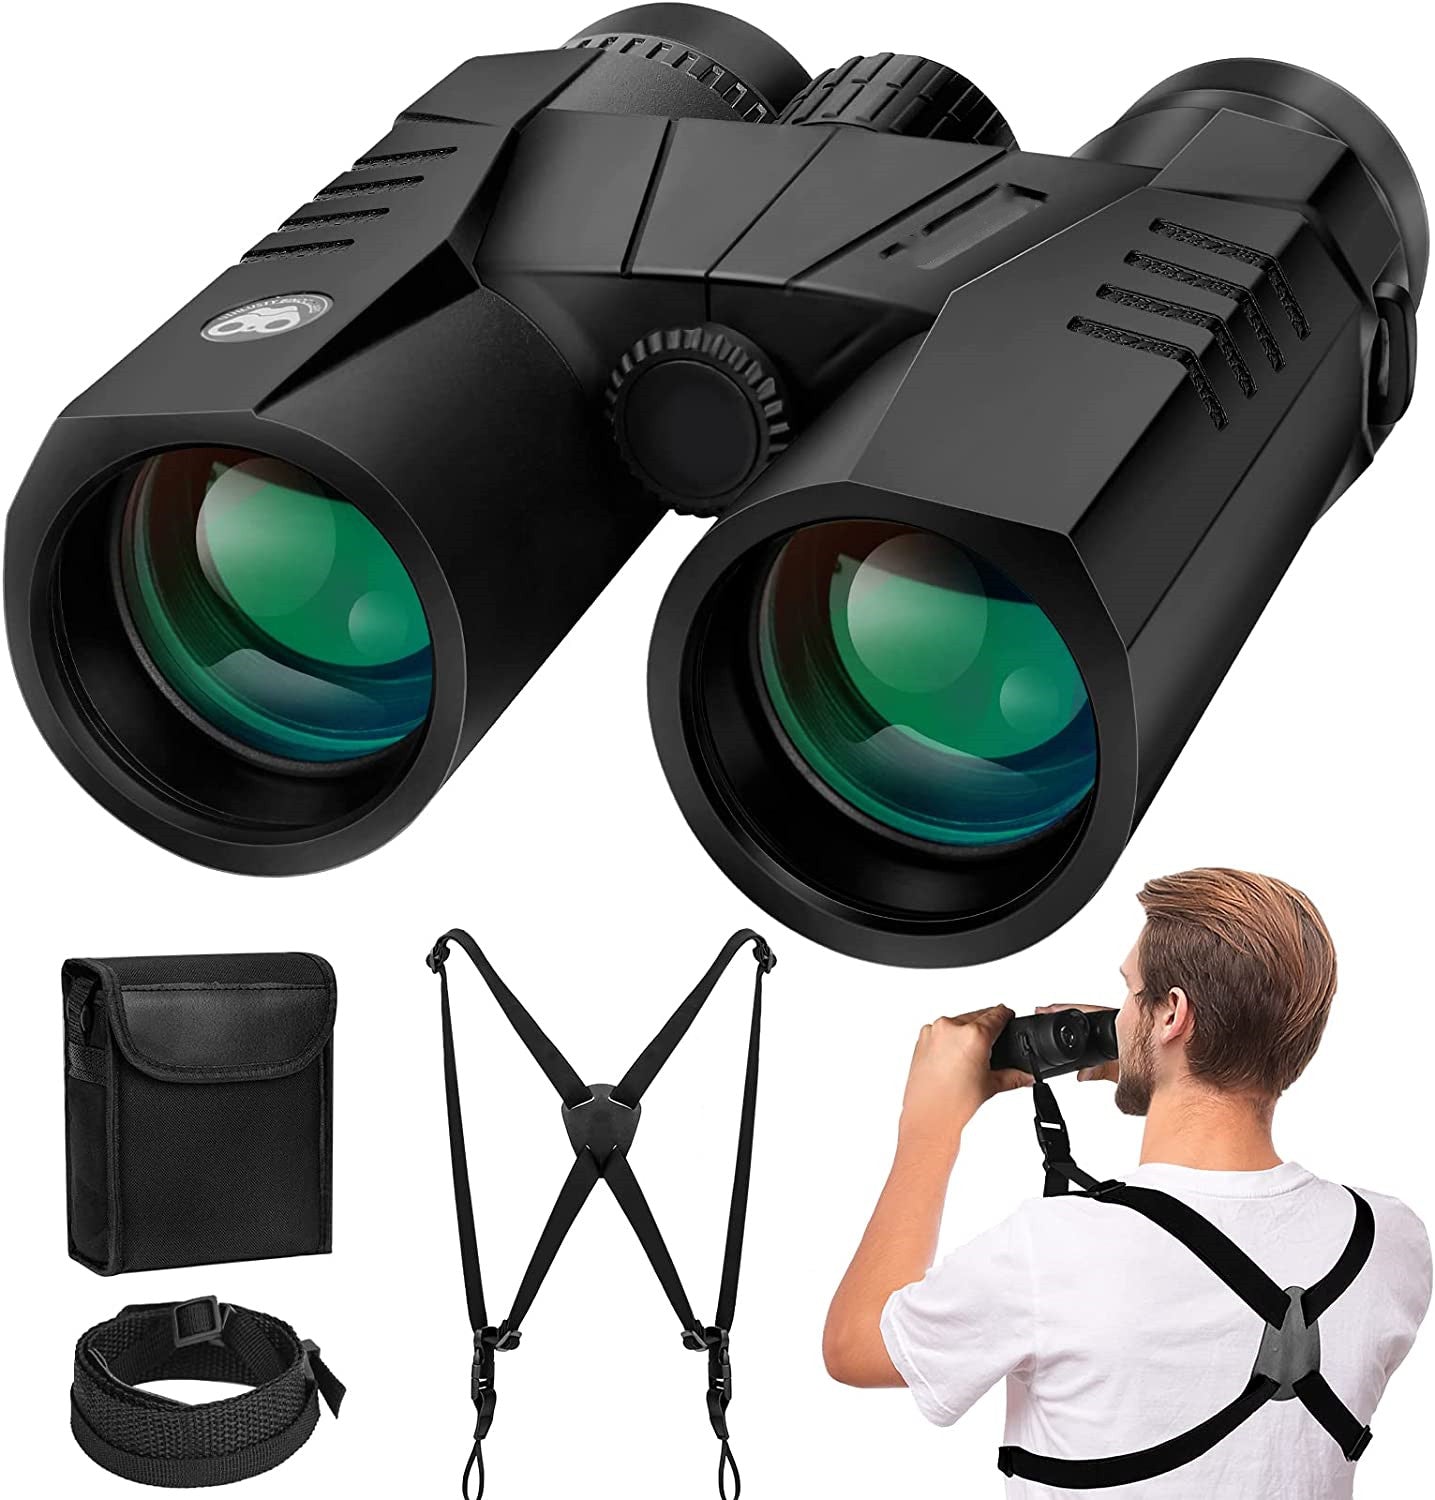 12X42 HD Binoculars for Adults with Harness Strap, Professional High Powered Lightweight BAK4 Prism Binoculars with Large View for Bird Watching, Hunting, Travel, Hiking, Sports, Concerts